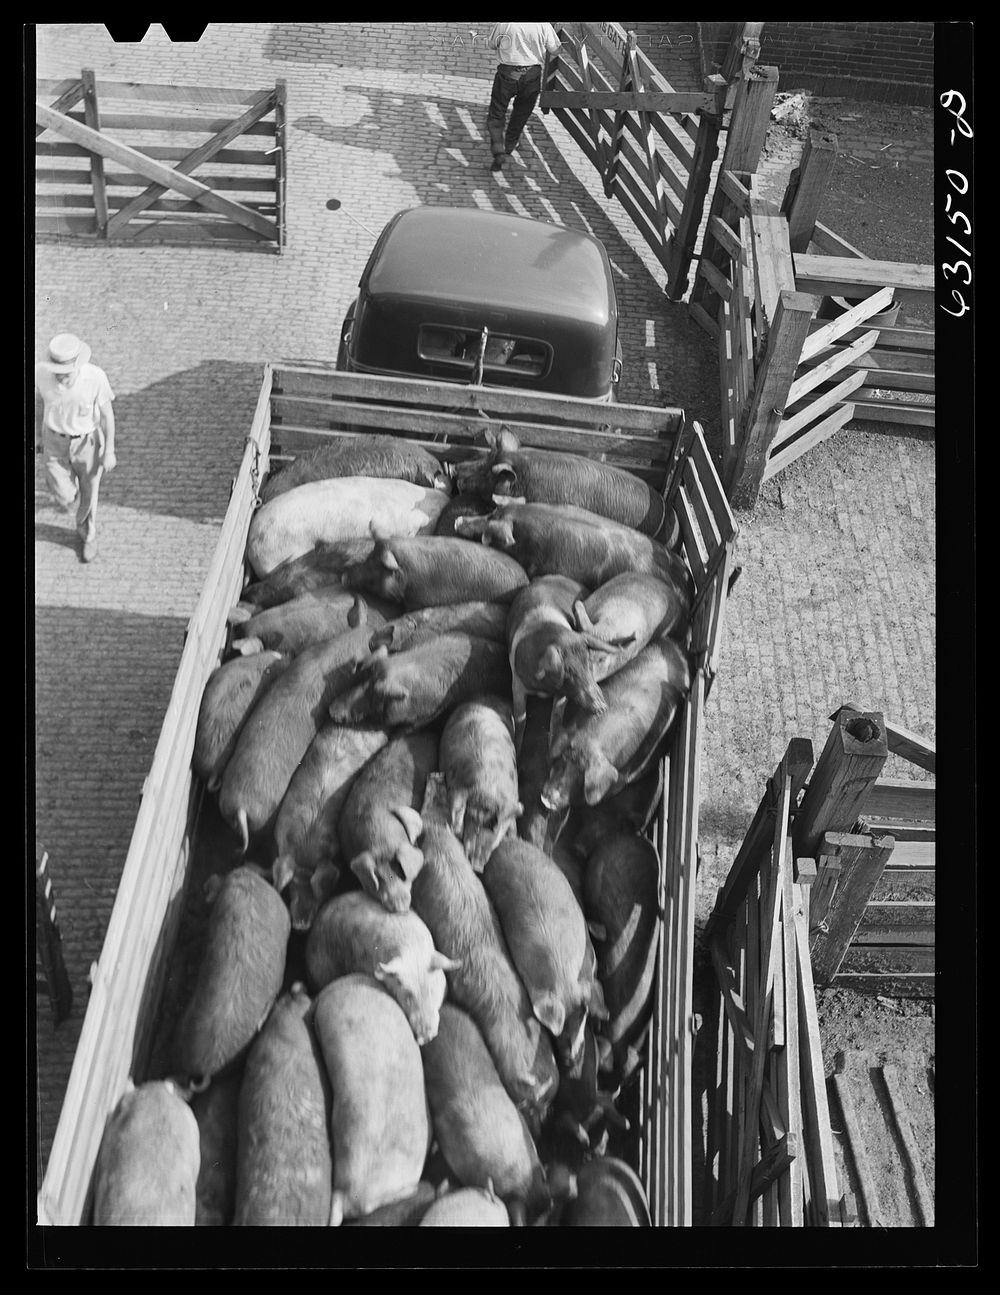 [Untitled photo, possibly related to: Unloading pigs from truck at Union Stockyard. Chicago, Illinois]. Sourced from the…